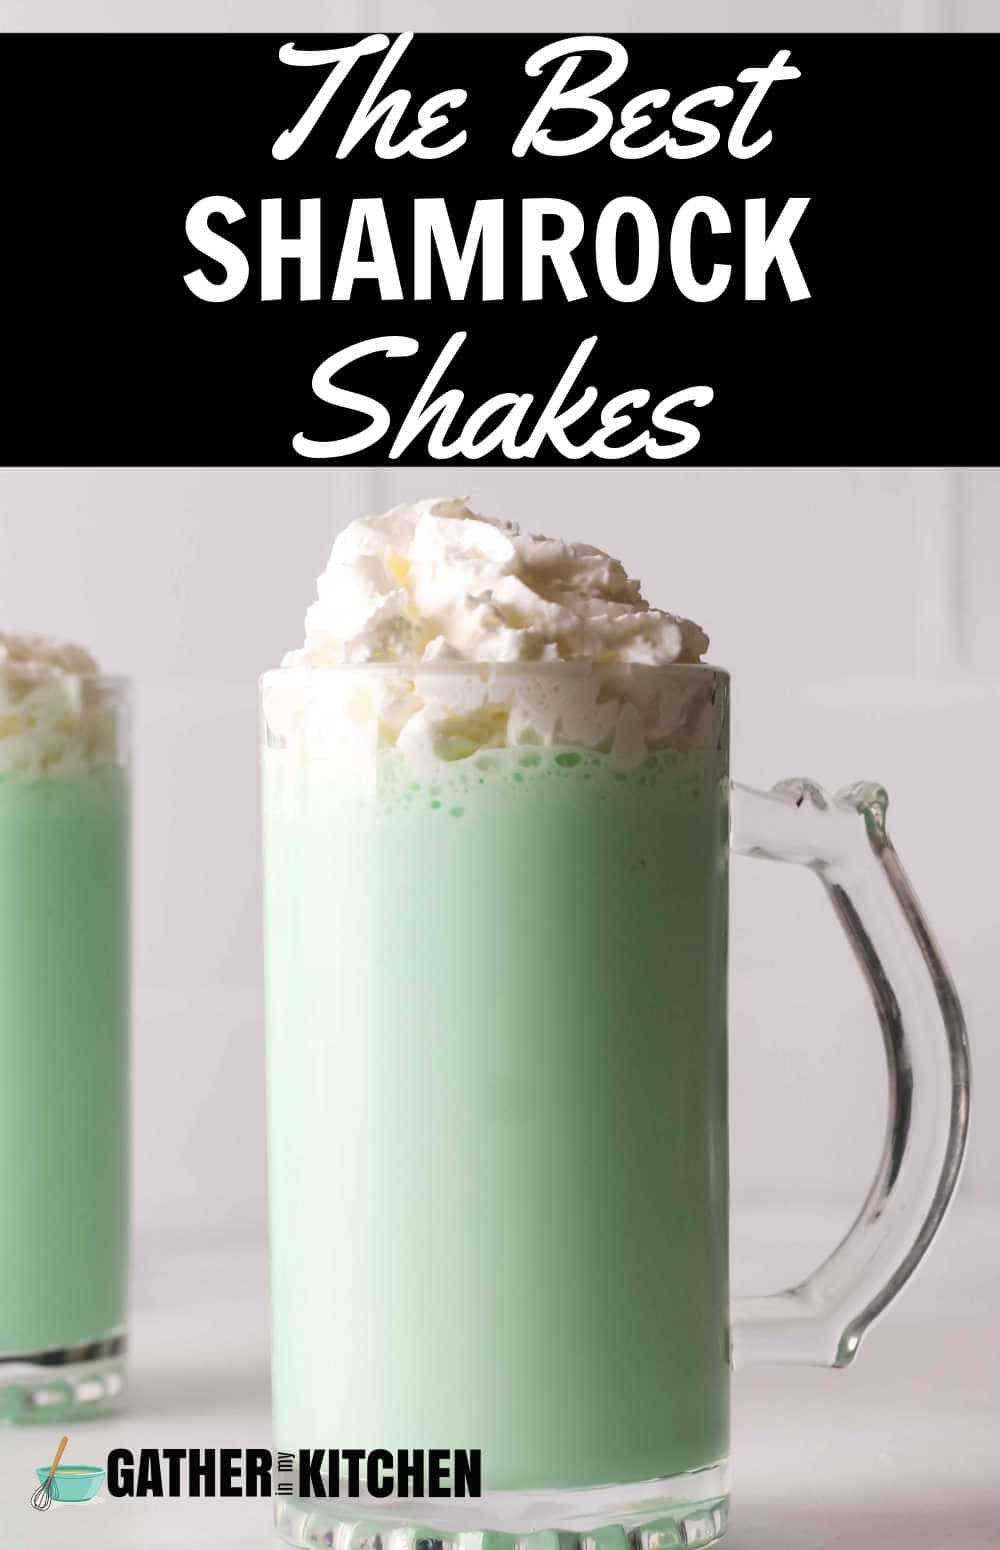 Pin image: top says "The Best Shamrock Shakes" and the bottom has a pic of a shamrock shake.